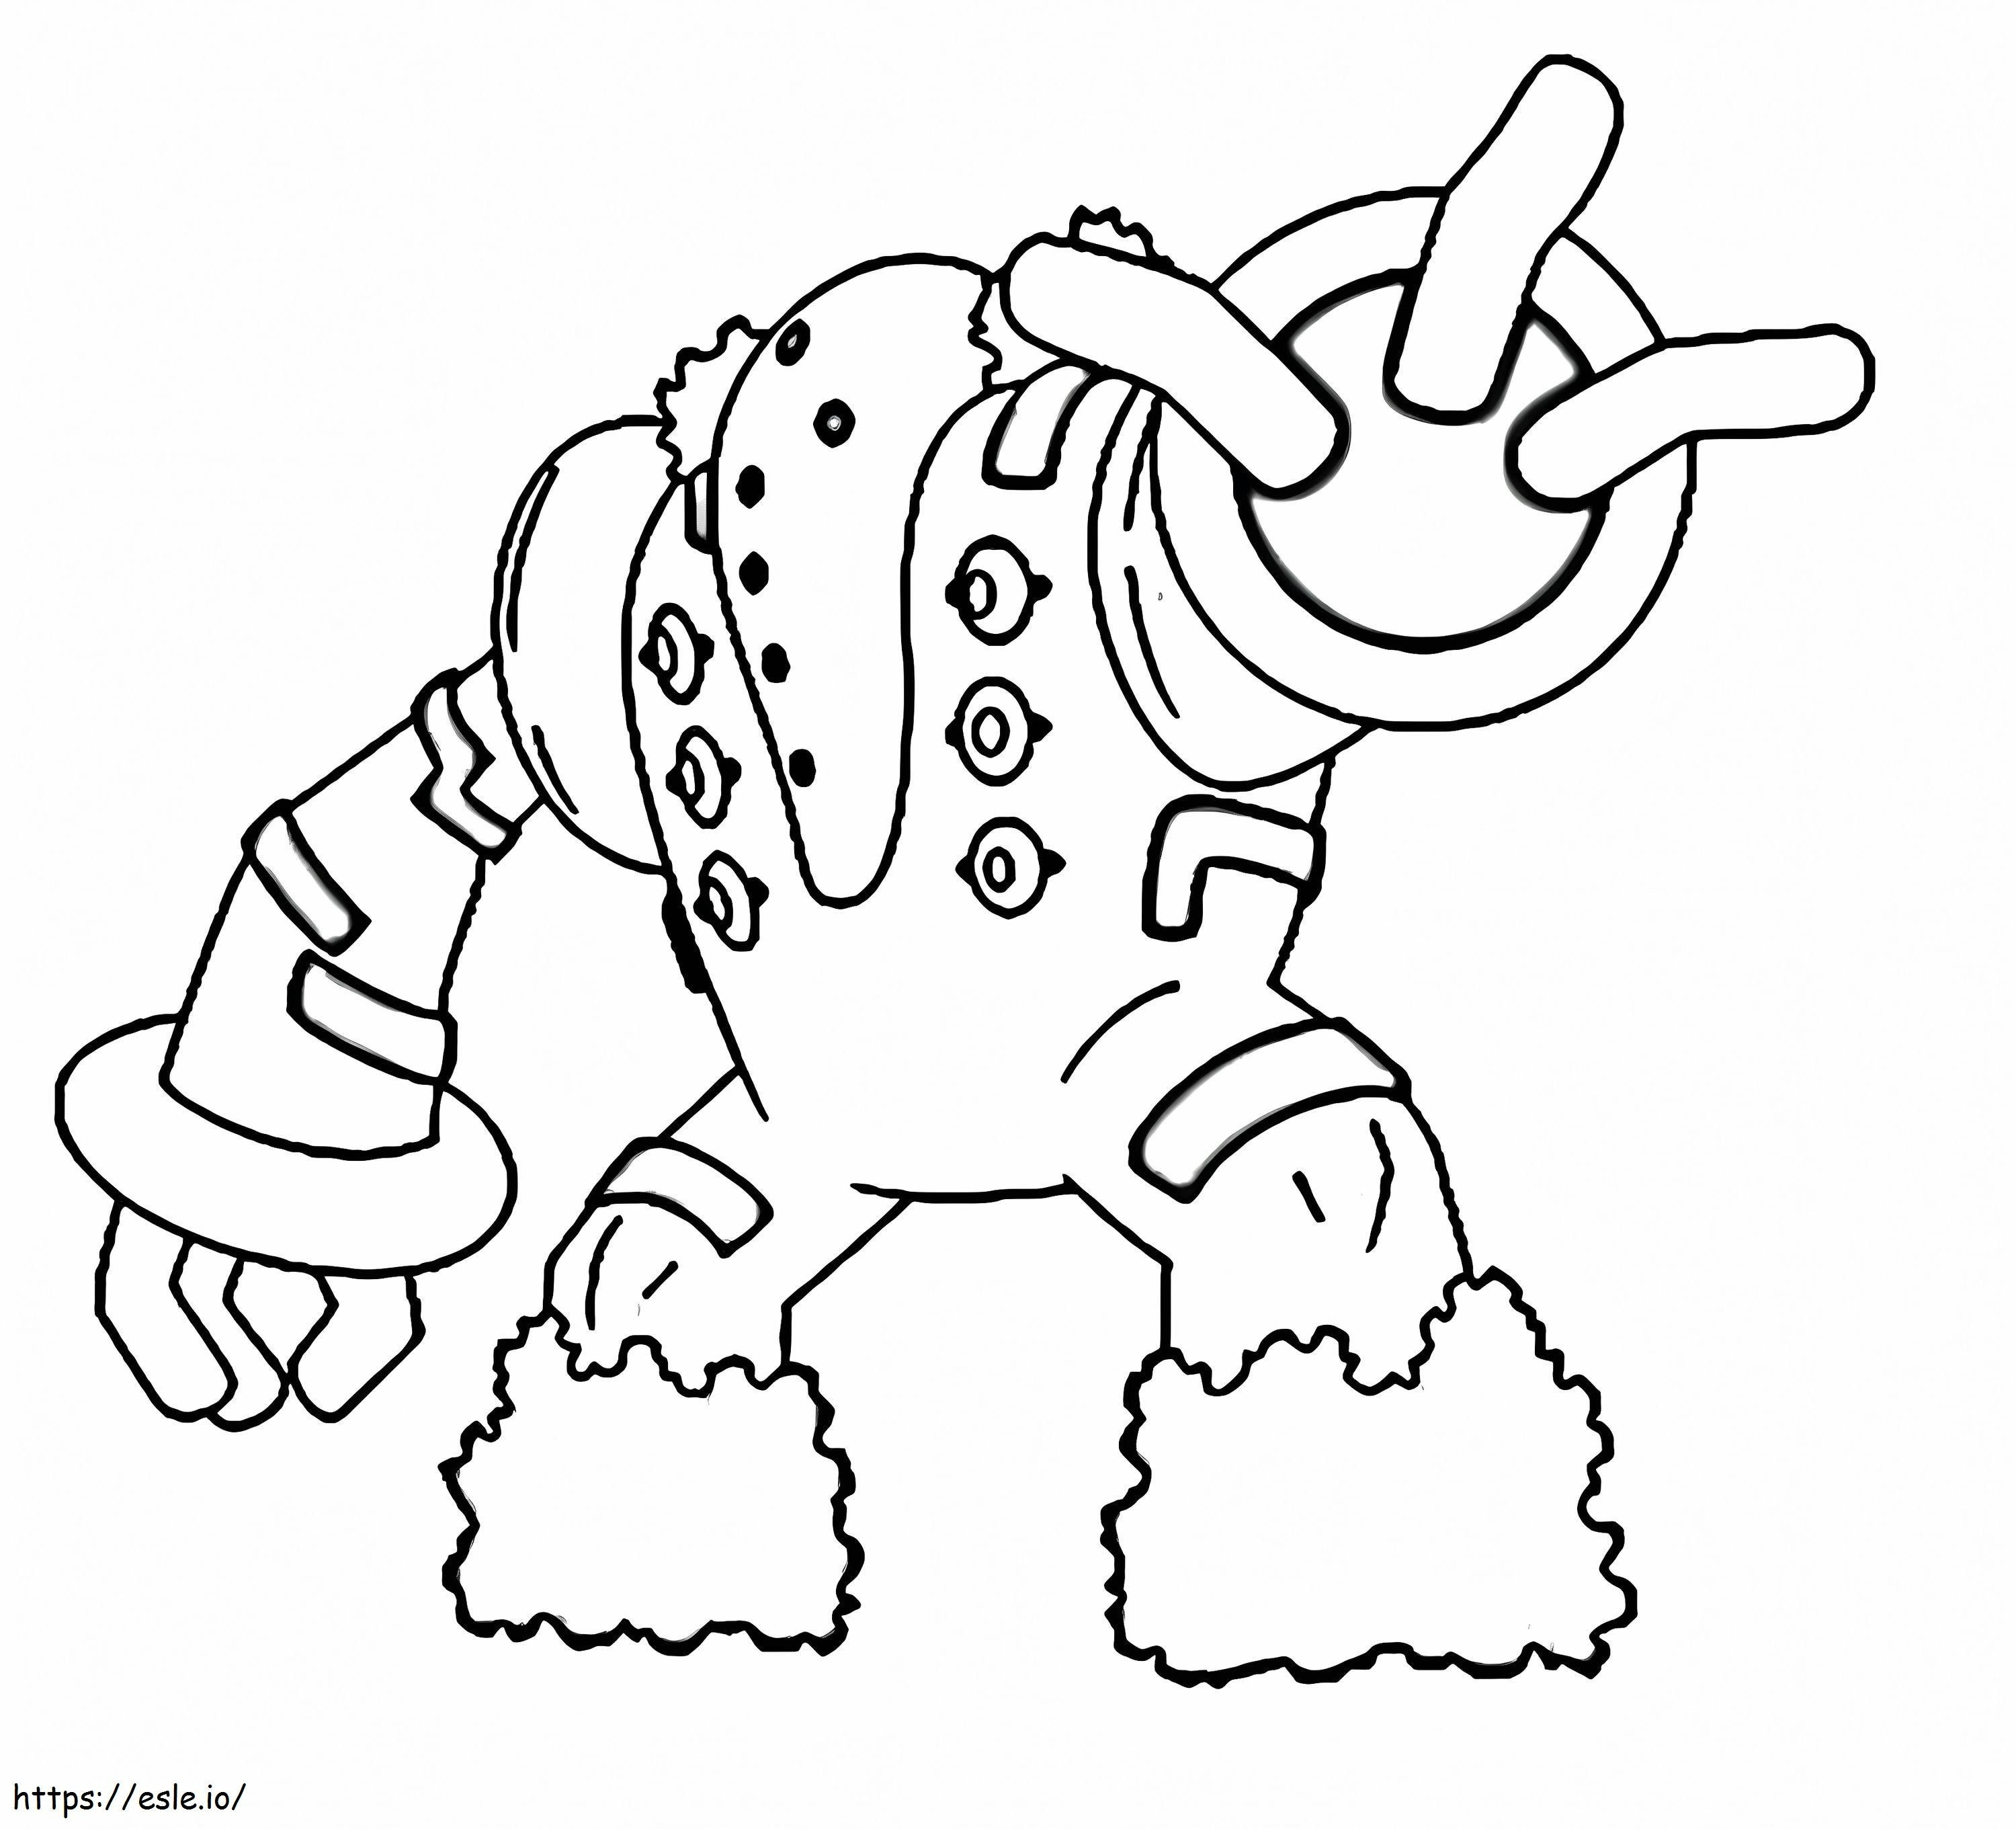 Controls 3 coloring page